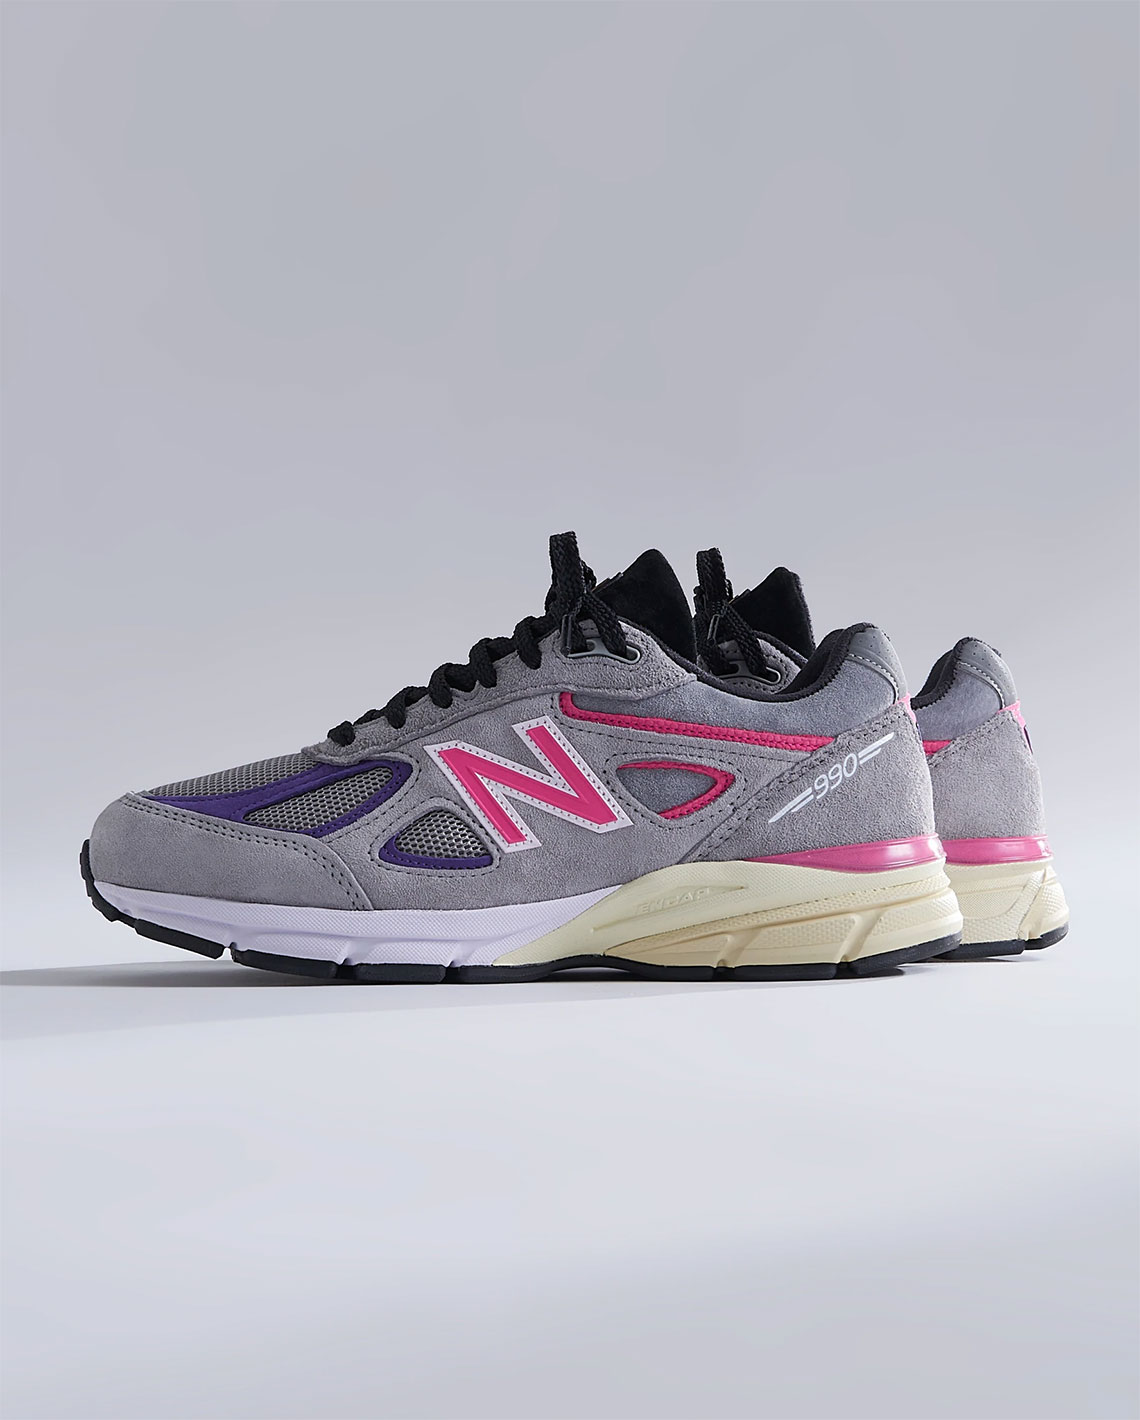 KITH New Balance 990v4 United Arrows & Sons Release Date